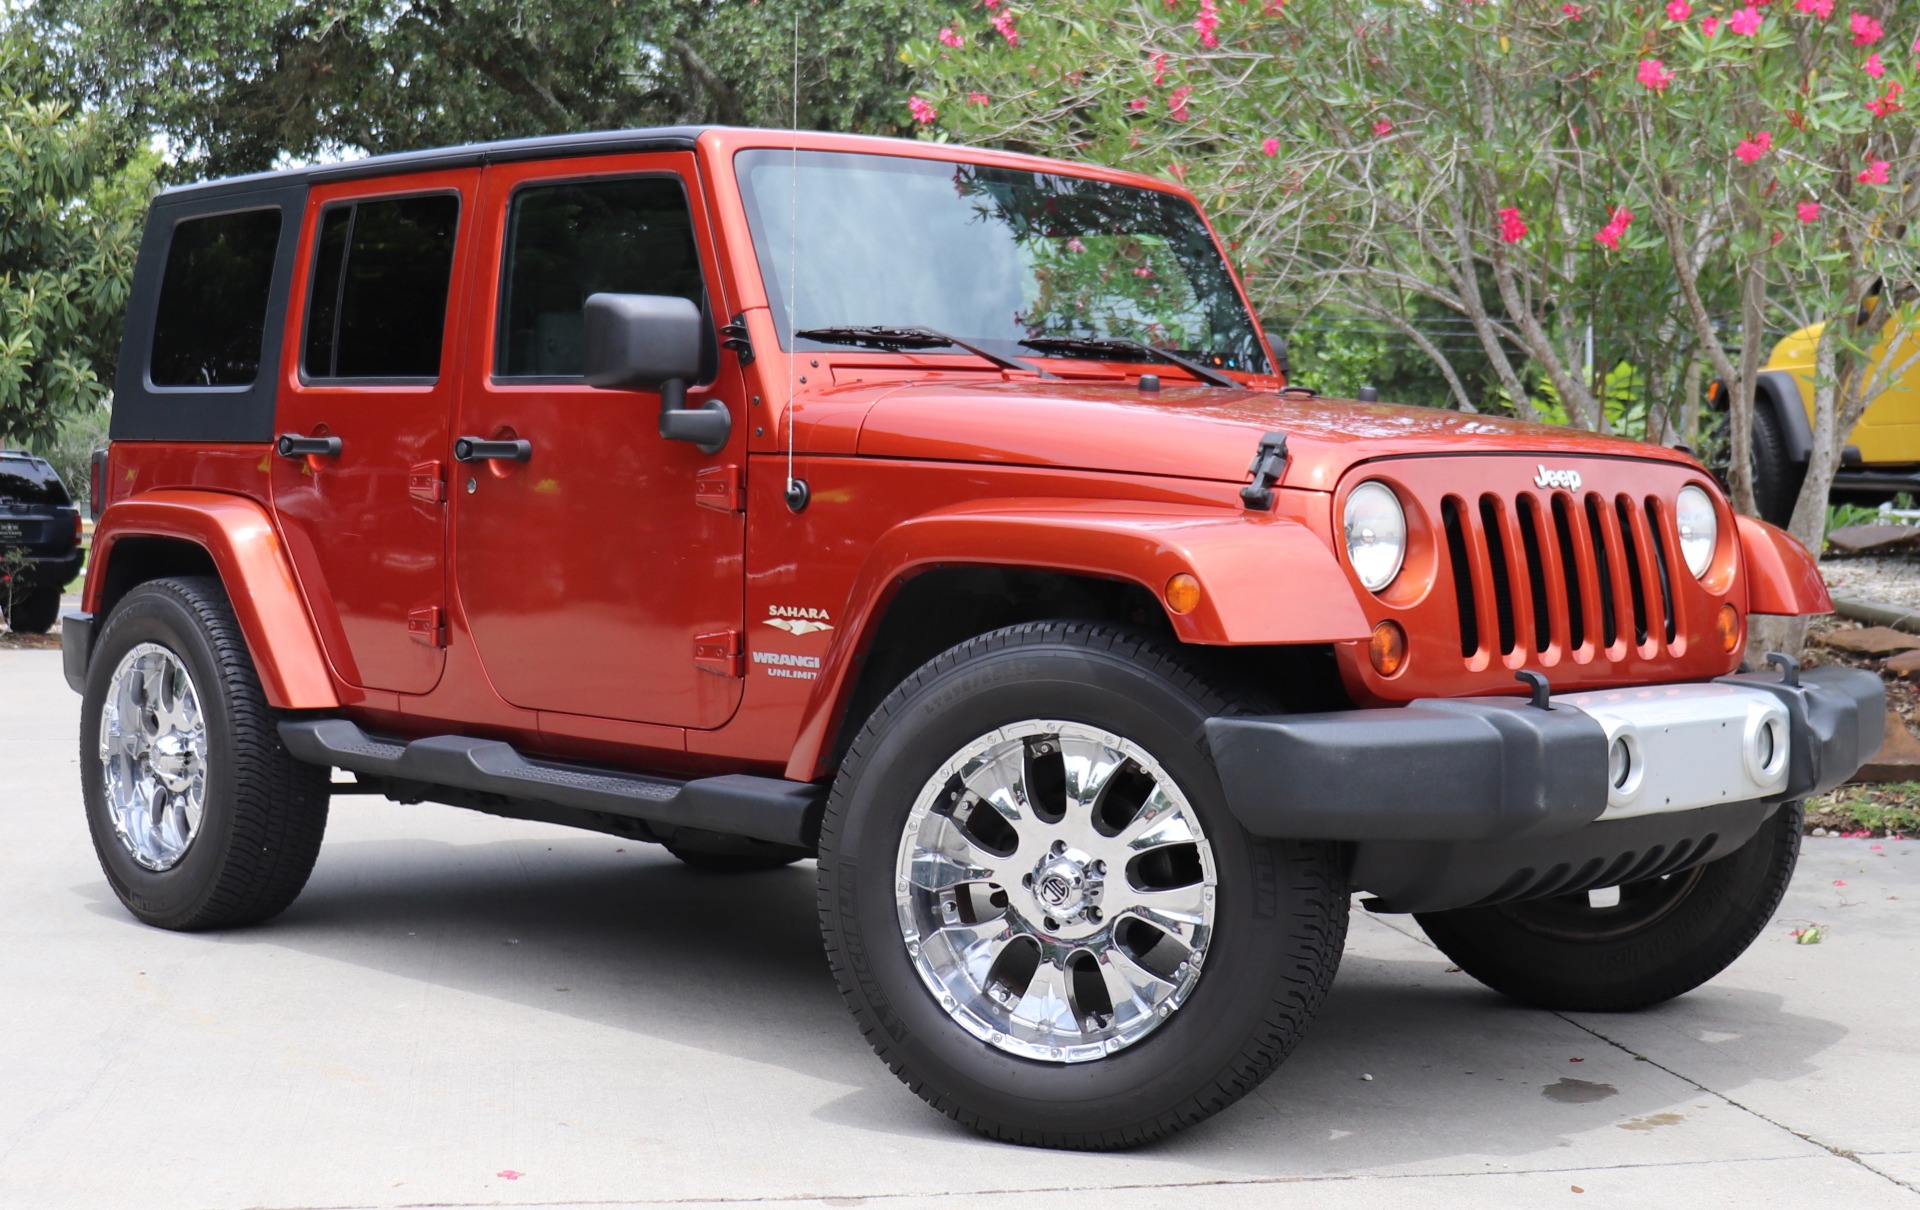 Used 2009 Jeep Wrangler Unlimited Sahara For Sale ($15,995) | Select Jeeps  Inc. Stock #713666